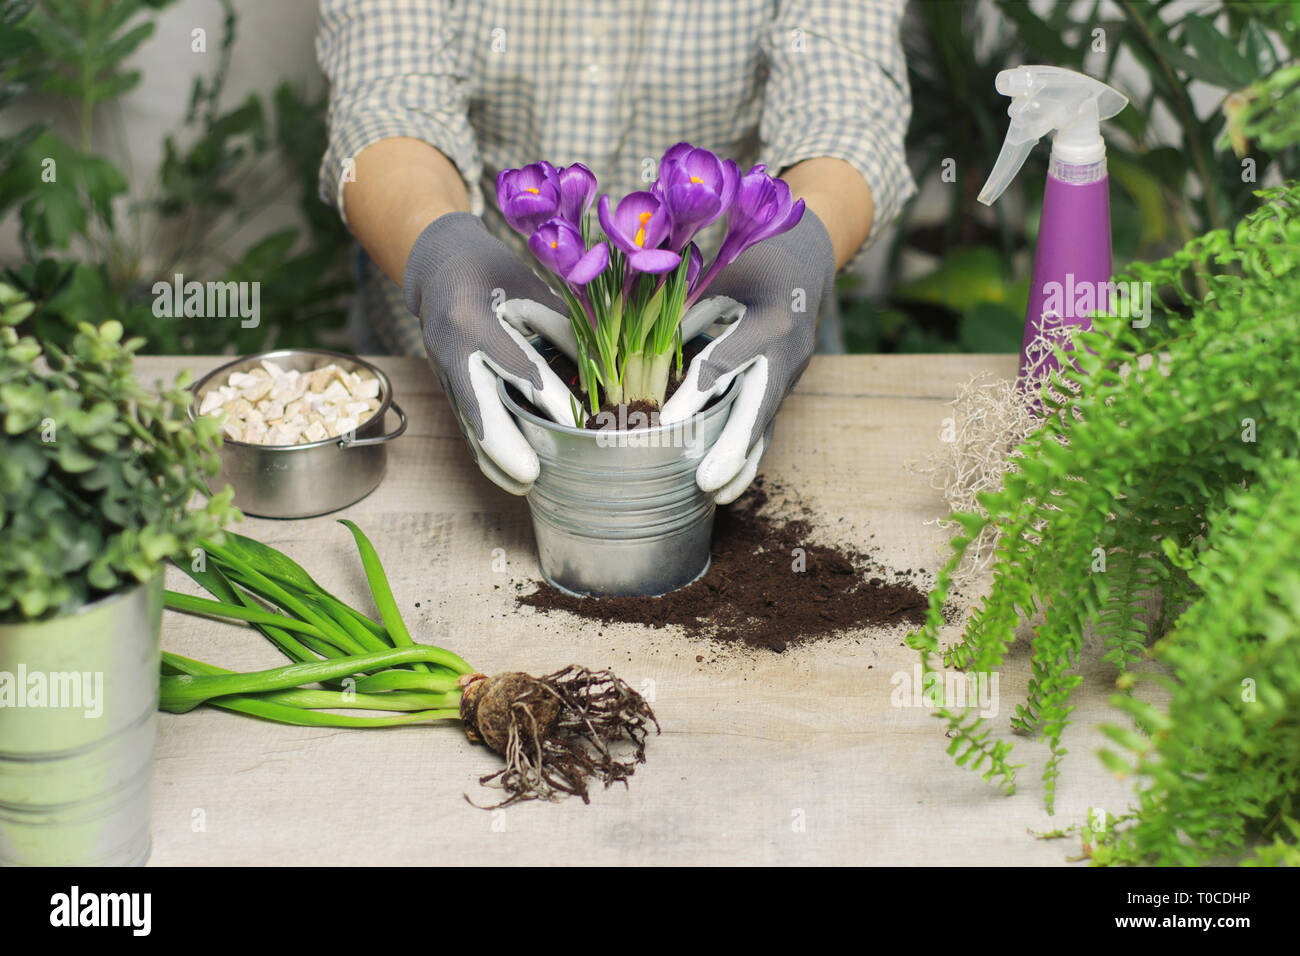 Women hands who planting flower in pot. Potted flower, ground and gloves on a wooden table. Spring gardening background. Stock Photo